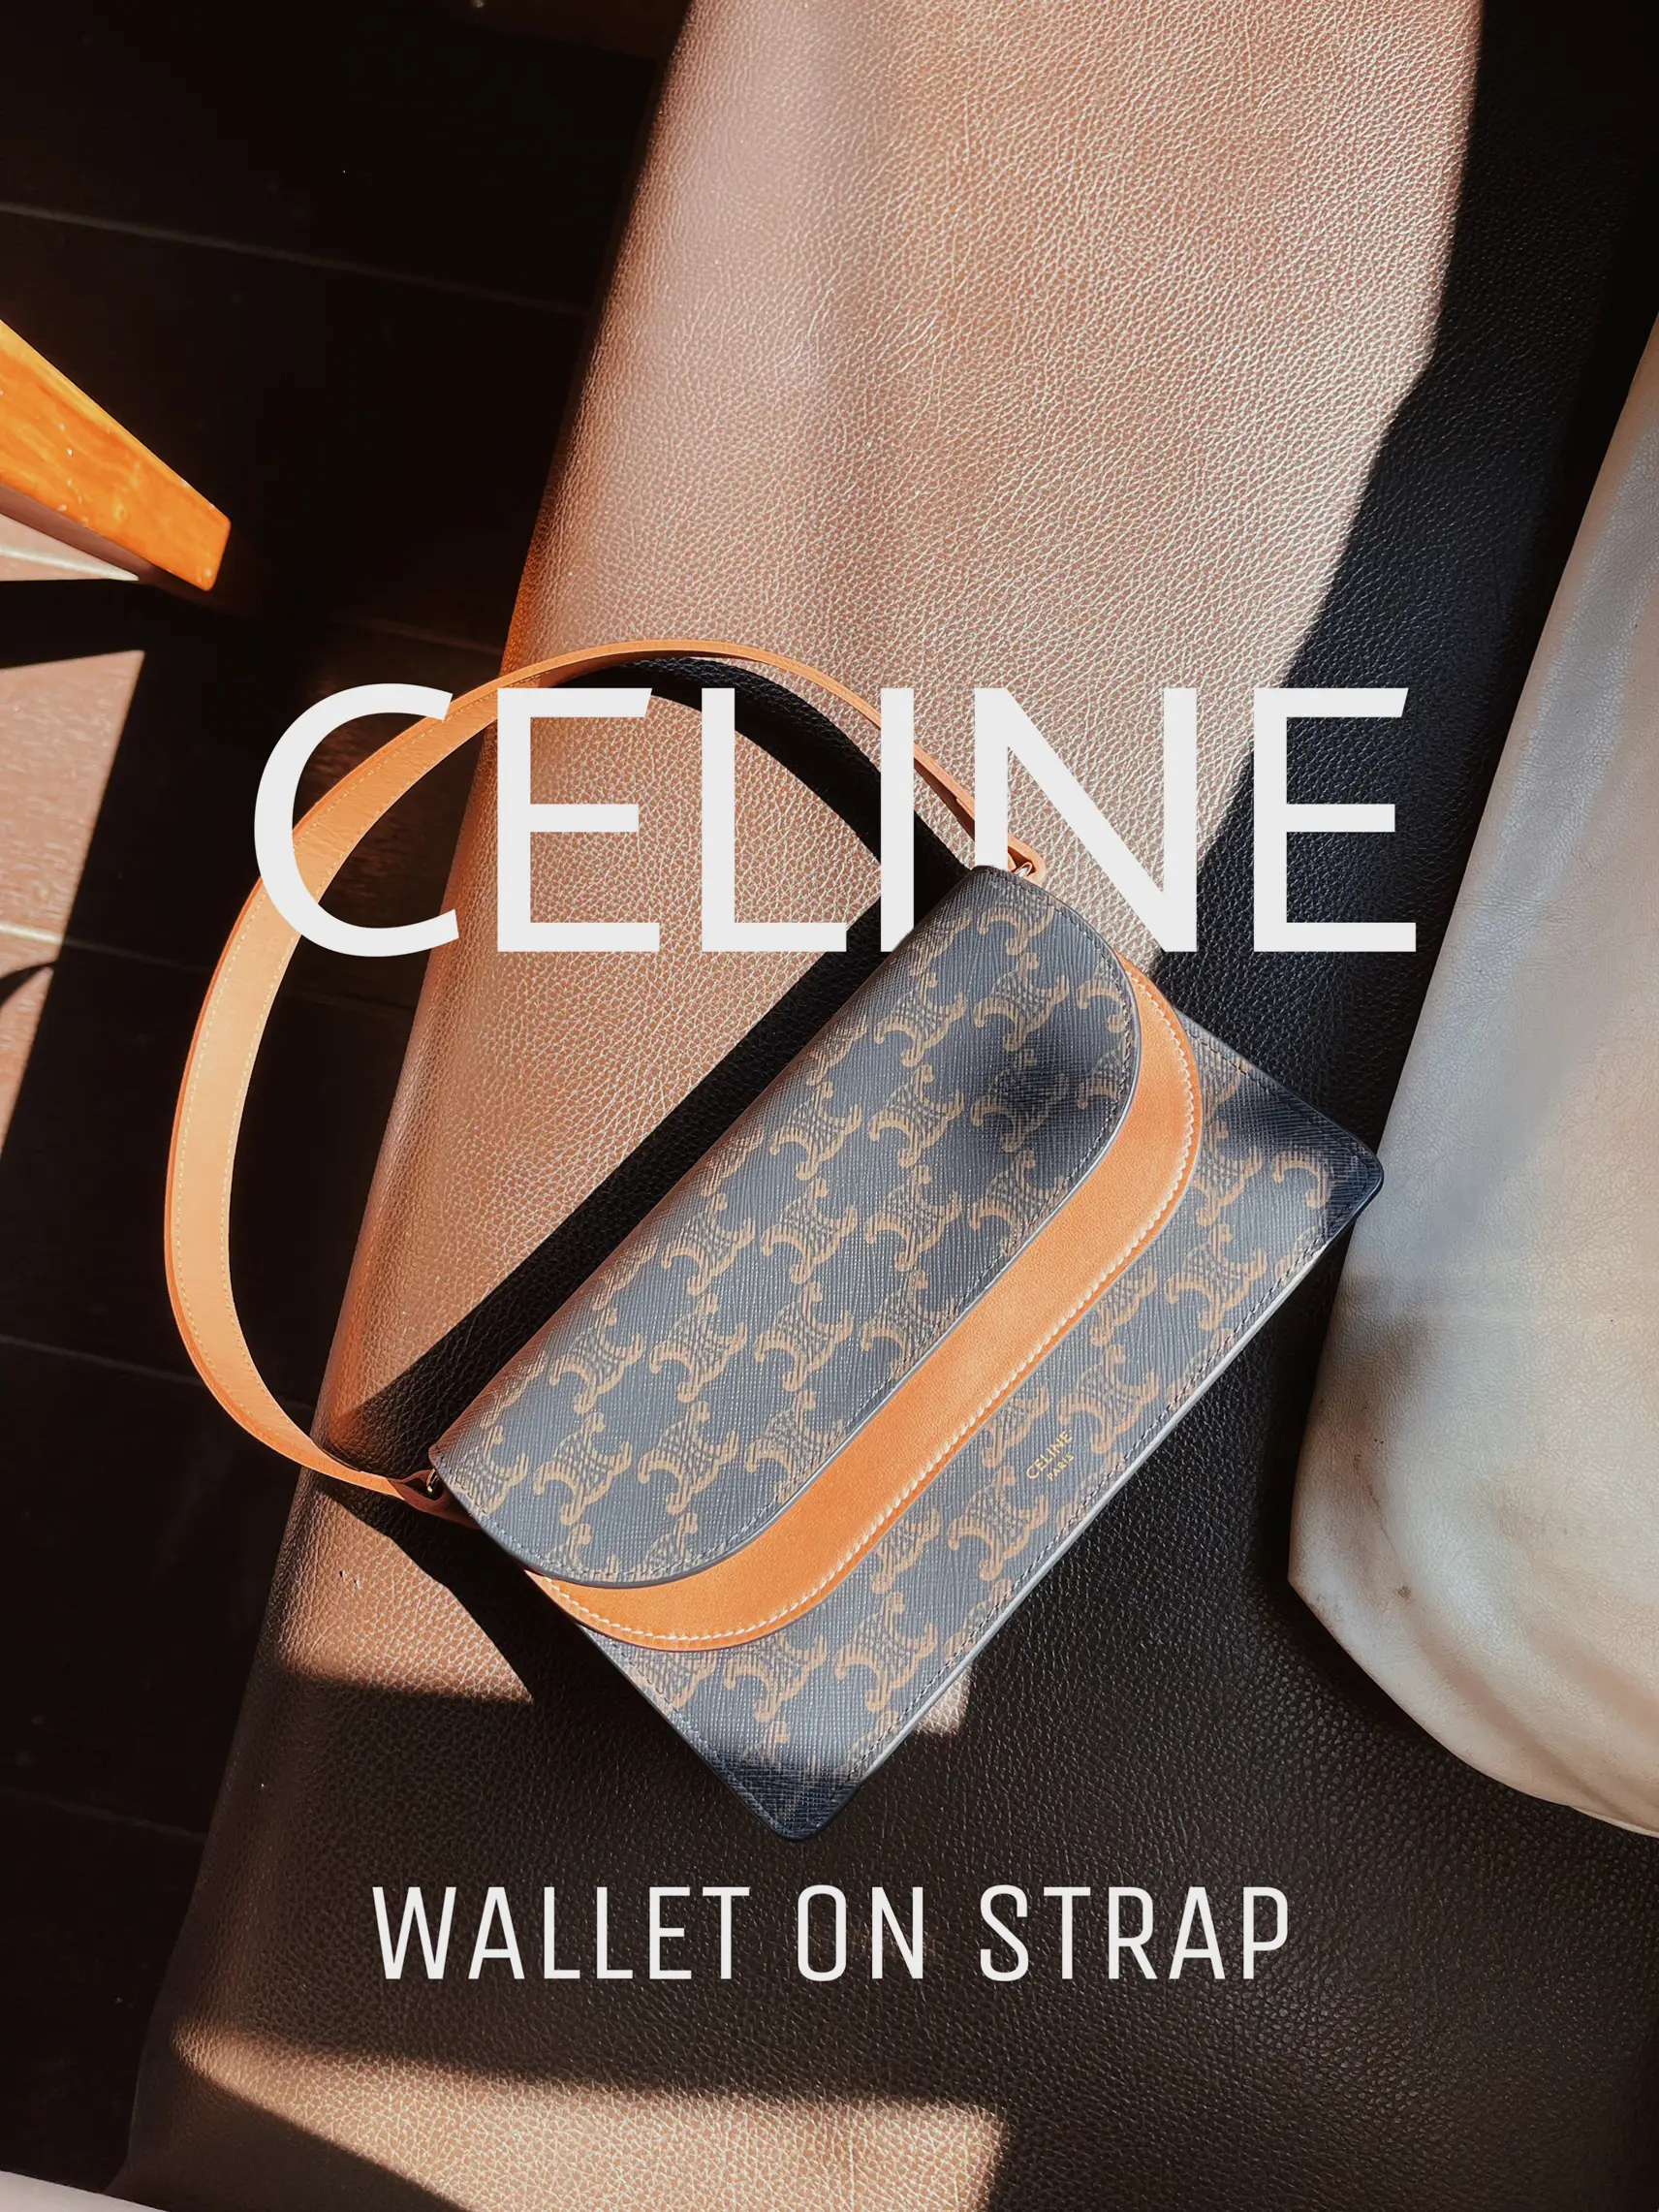 2018 Celine Medium Strap Wallet Review (vs. 2013 Celine Zip Around Wallet)  {Updated January 2021} — Fairly Curated